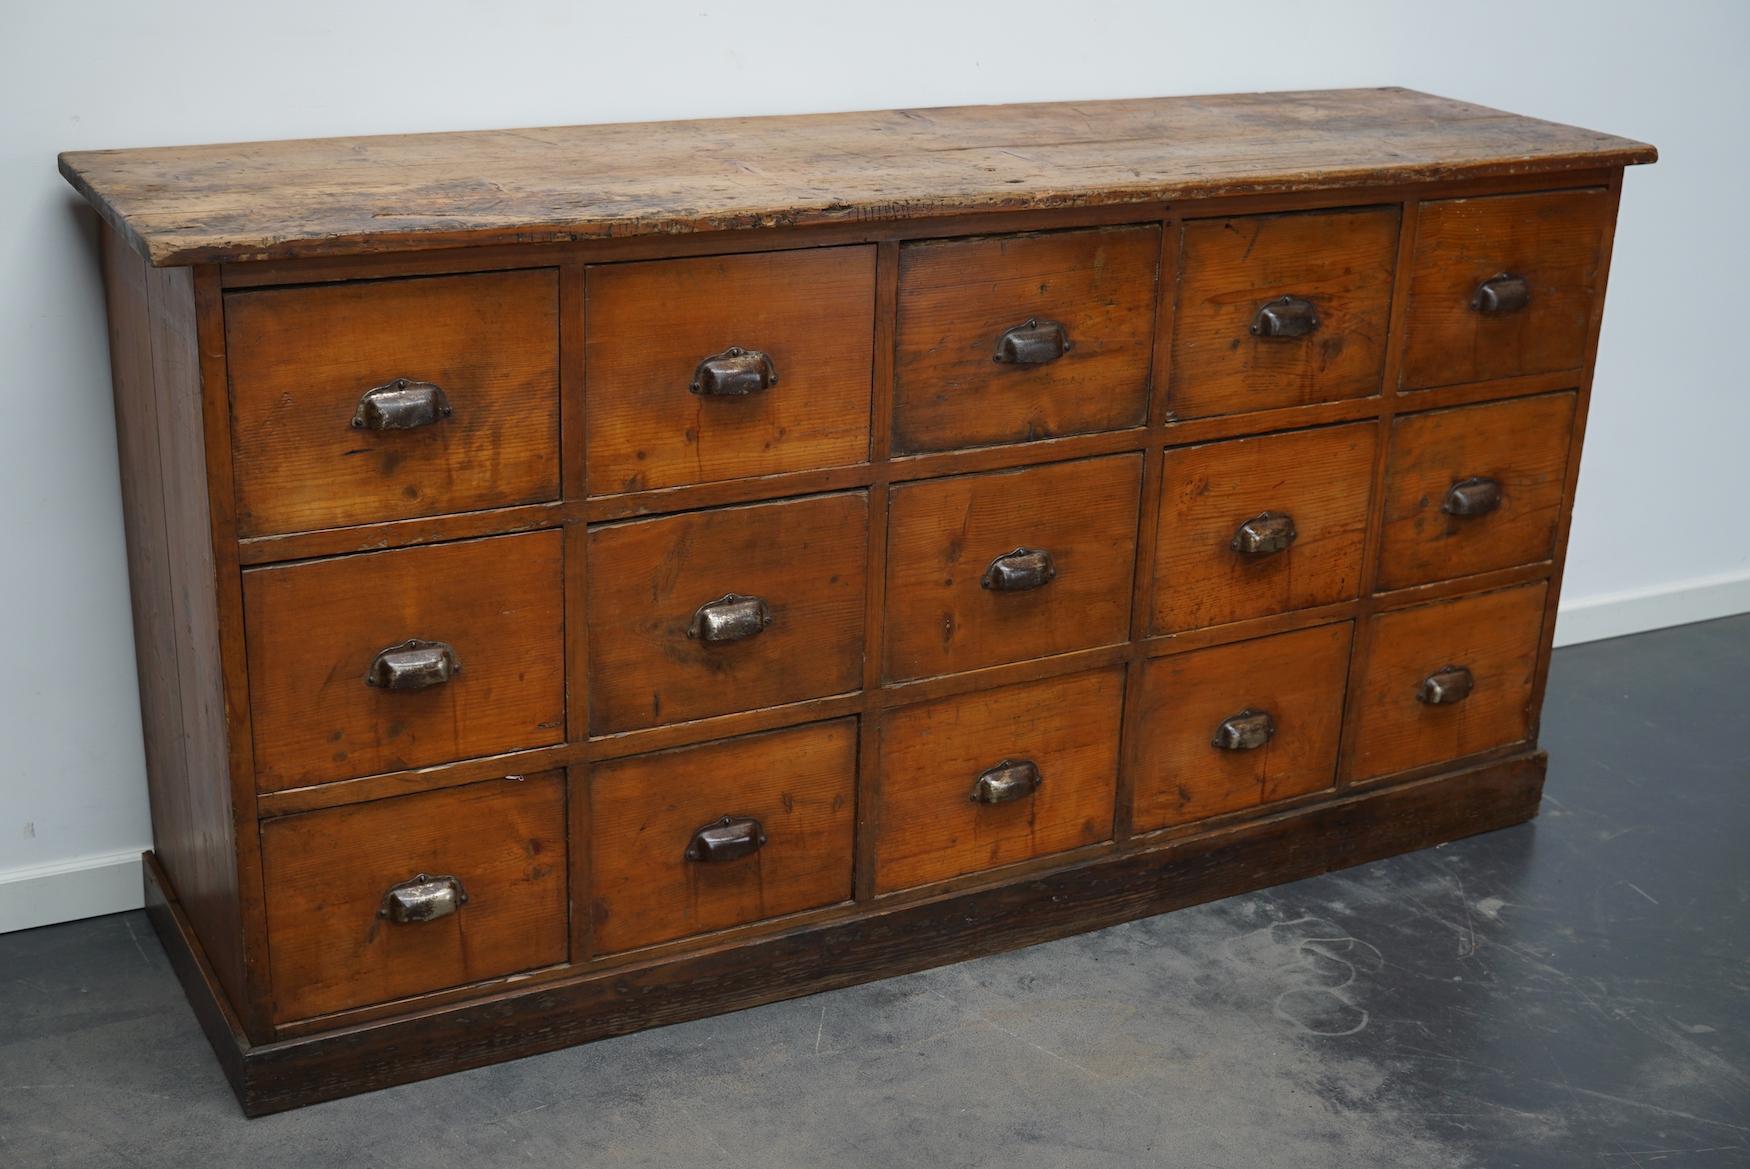 Industrial French Pine Apothecary Workshop Cabinet / Sideboard, circa 1950s